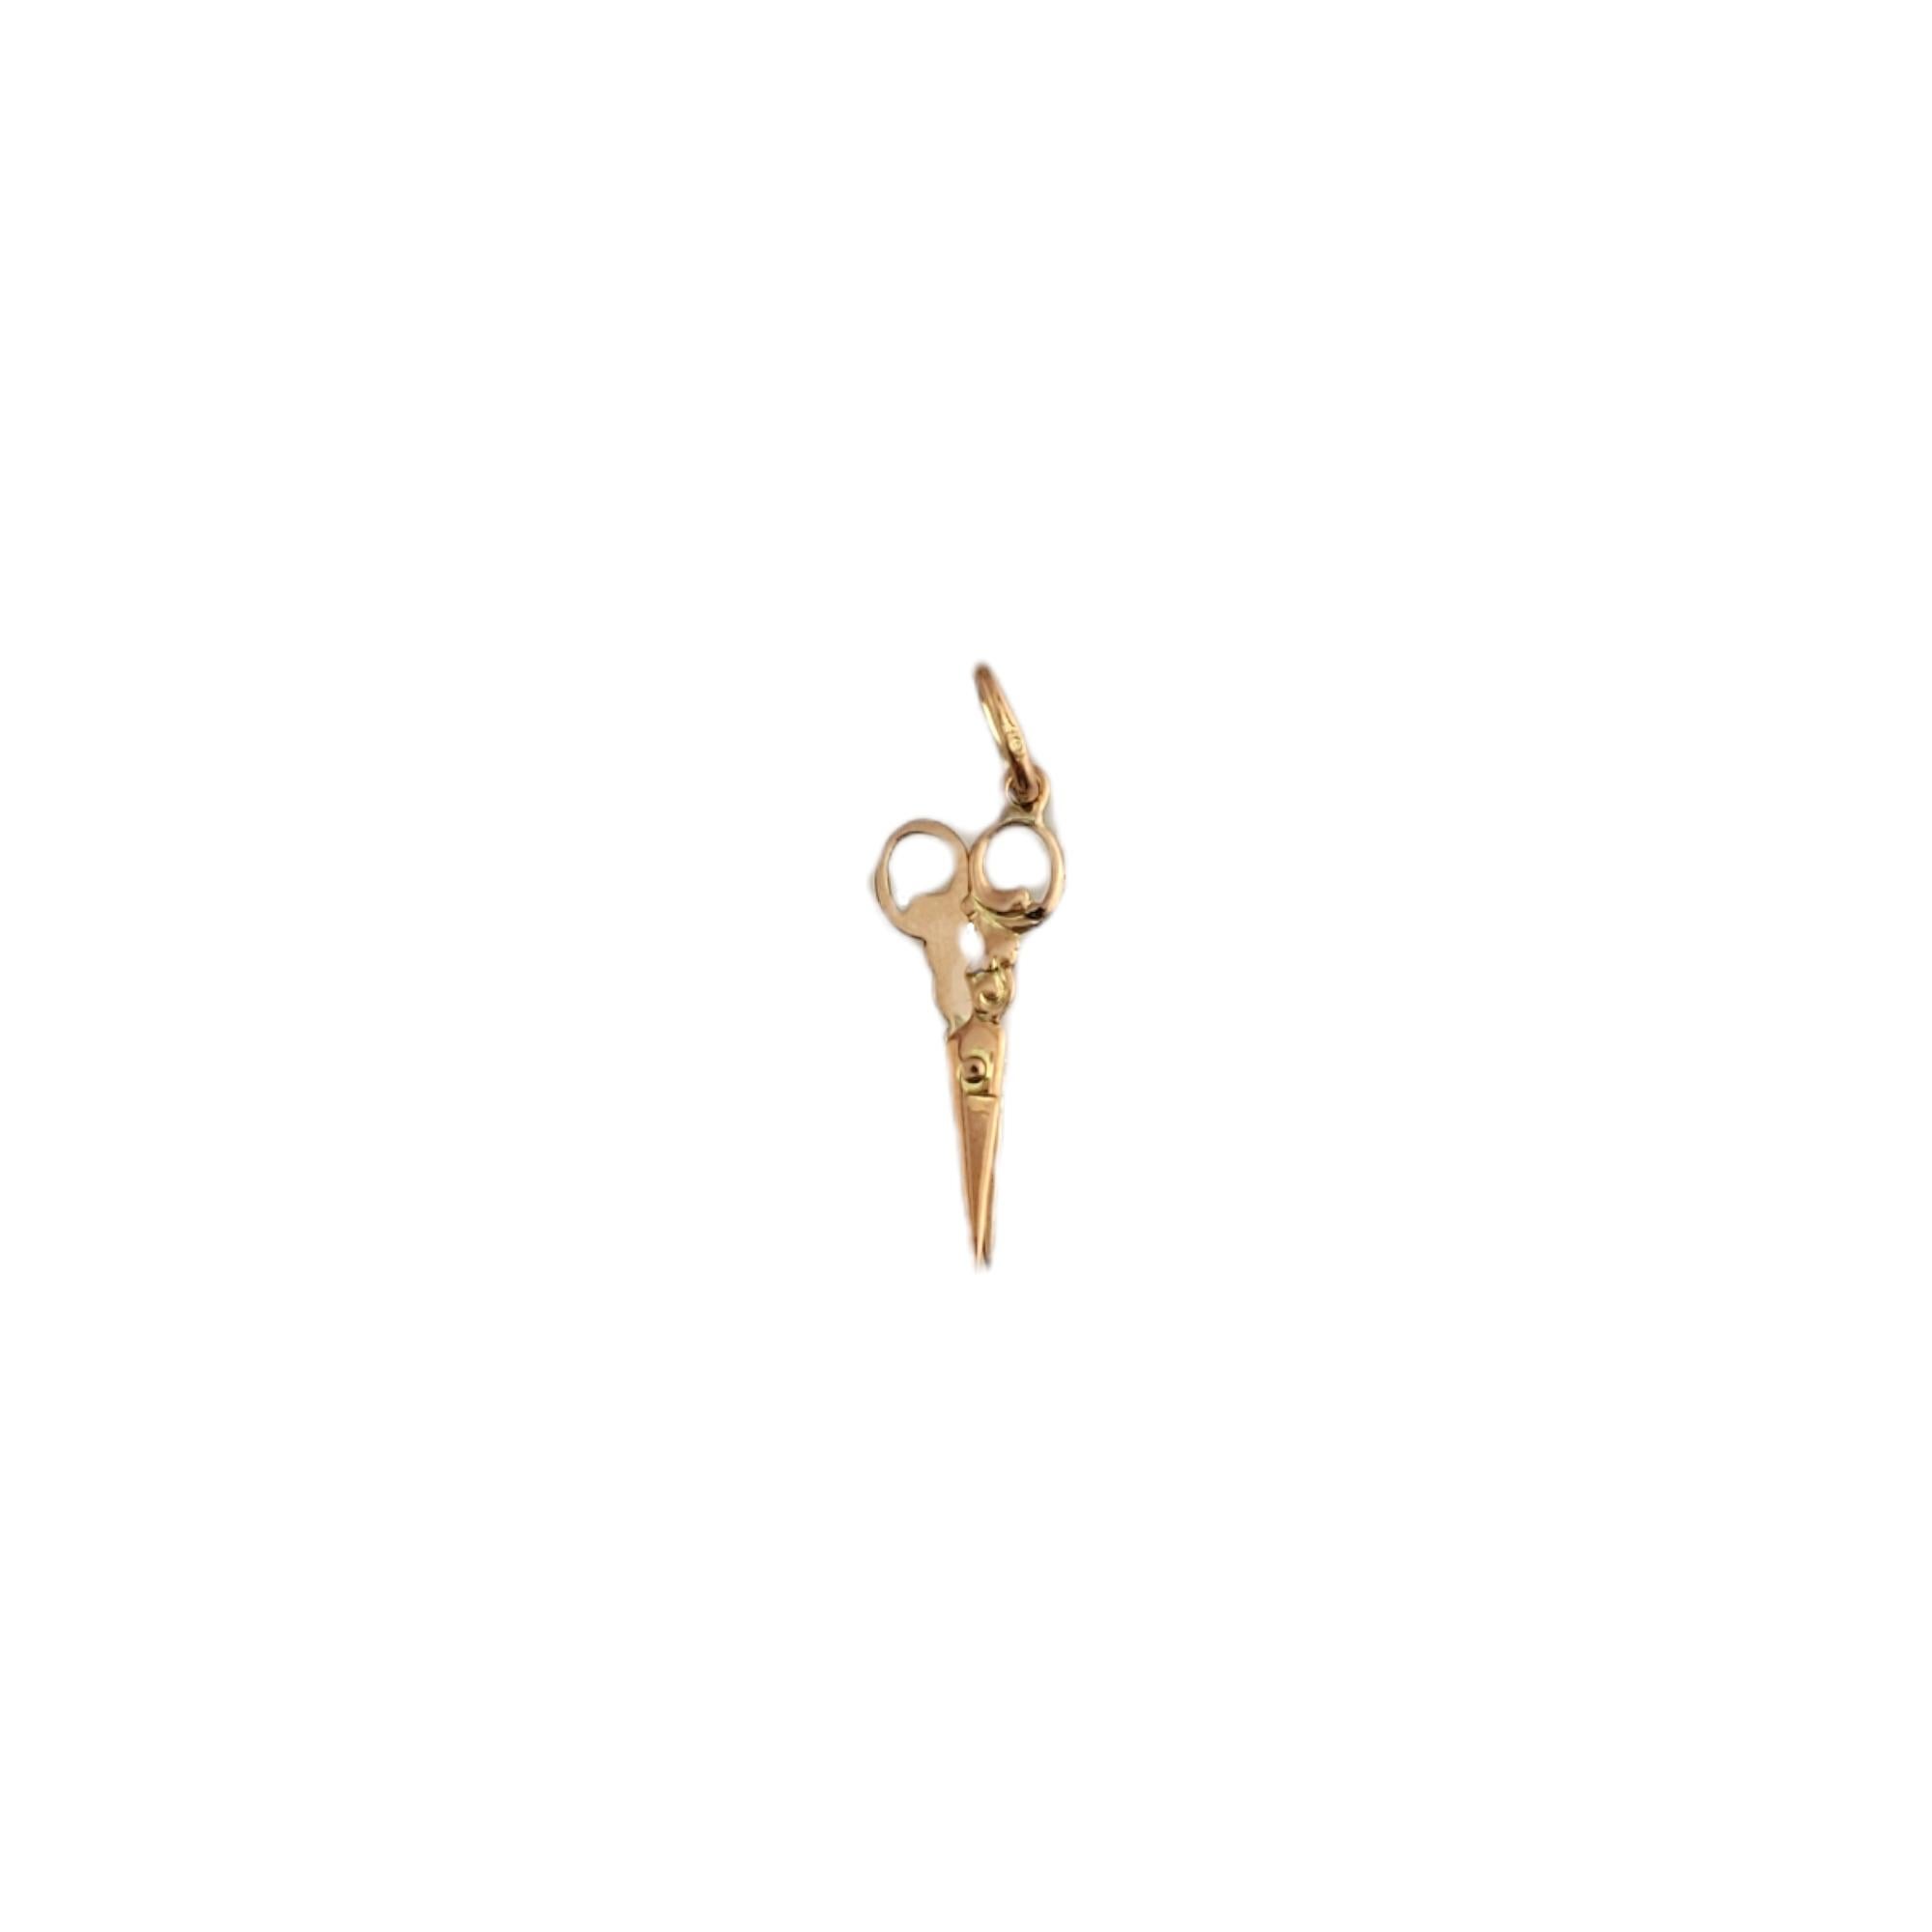 10K Yellow Gold Scissors Charm 

You'll love this yellow gold scissors charm! 

Size:8.77 mm X 28.19mm

Weight: 0.3 gr / 0.1 dwt

Hallmark: 10 on loop 

Very good condition, professionally polished.

Will come packaged in a gift box and will be